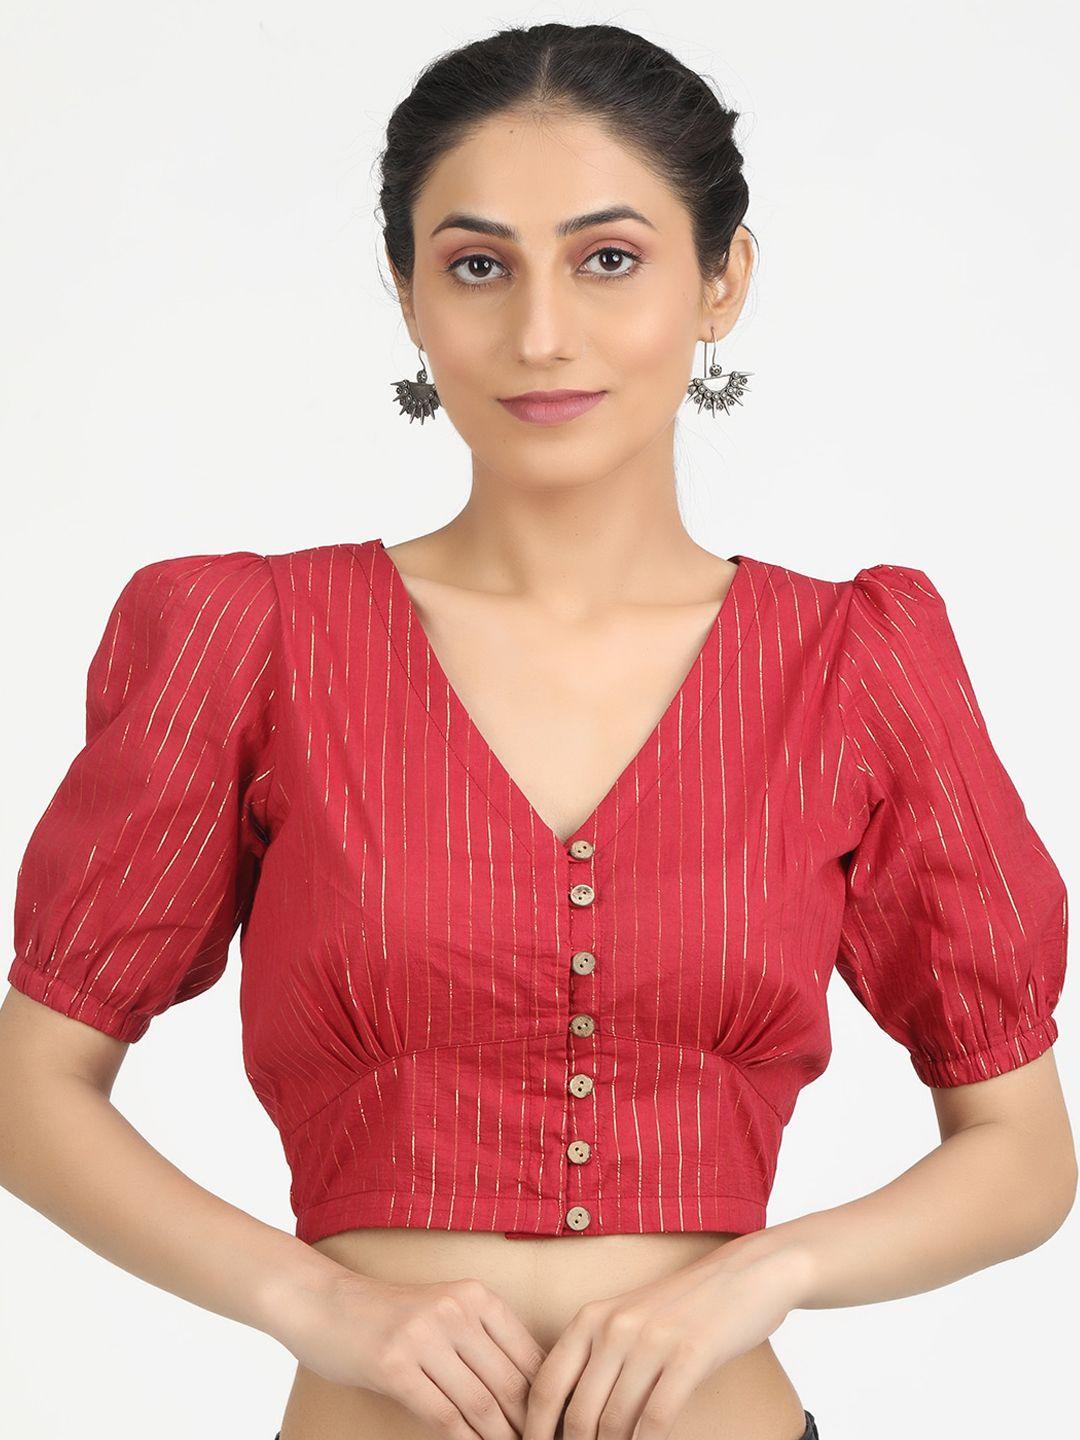 llajja red & gold-coloured striped pure cotton saree blouse